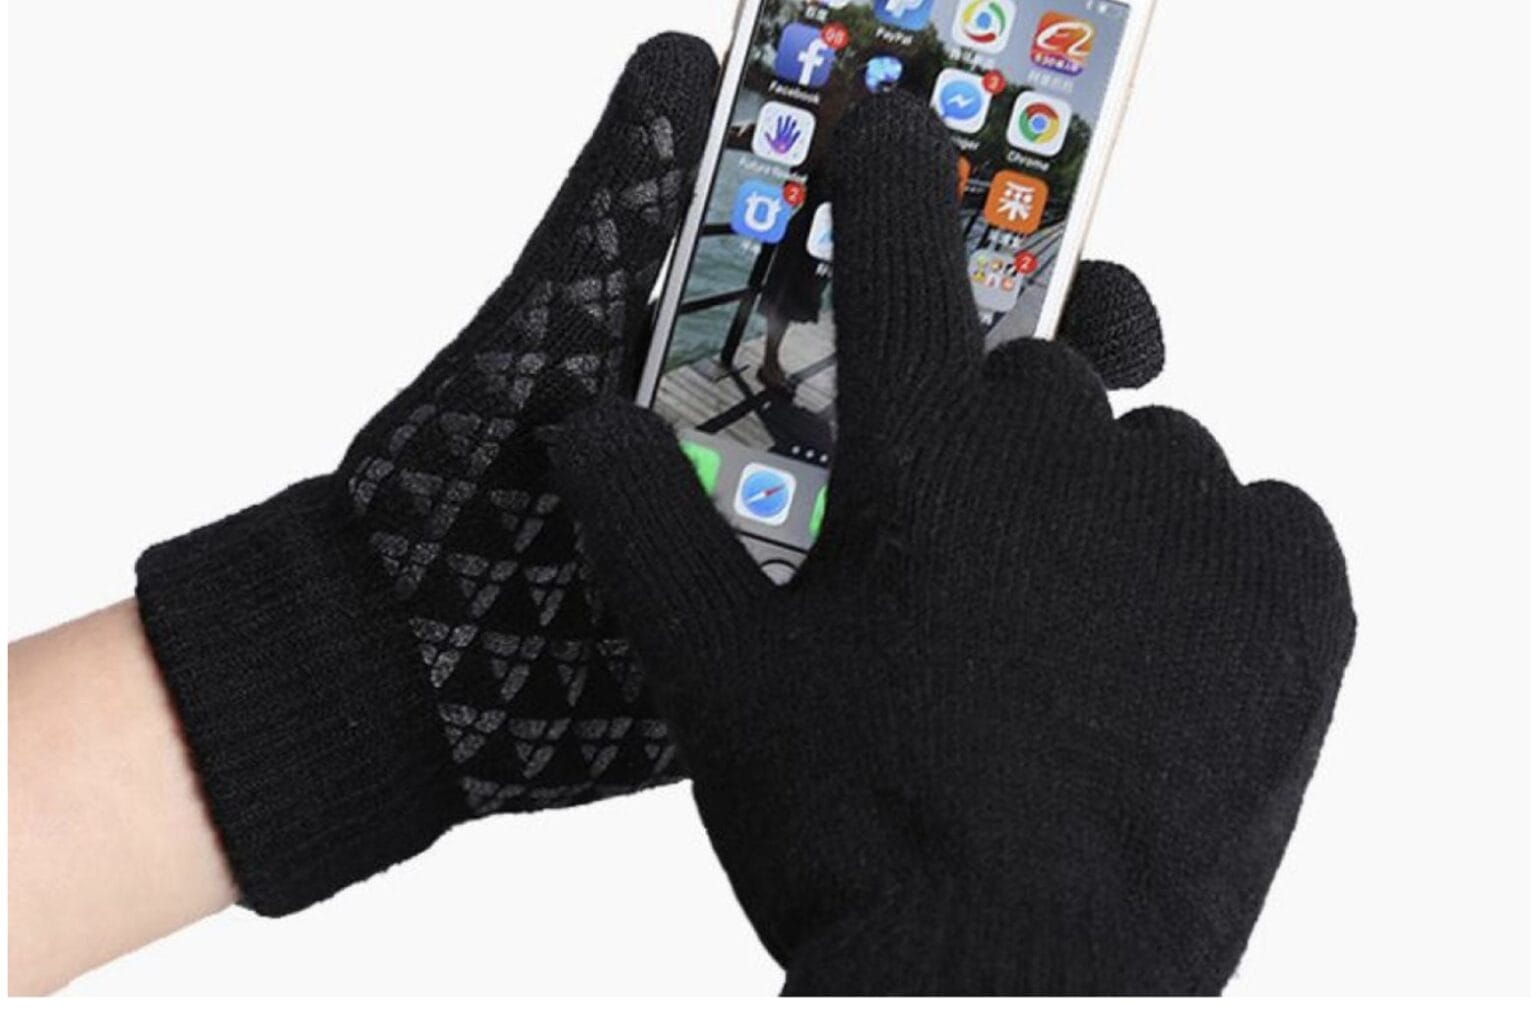 Use these $12 touchscreen-compatible gloves for cozy holiday connection.